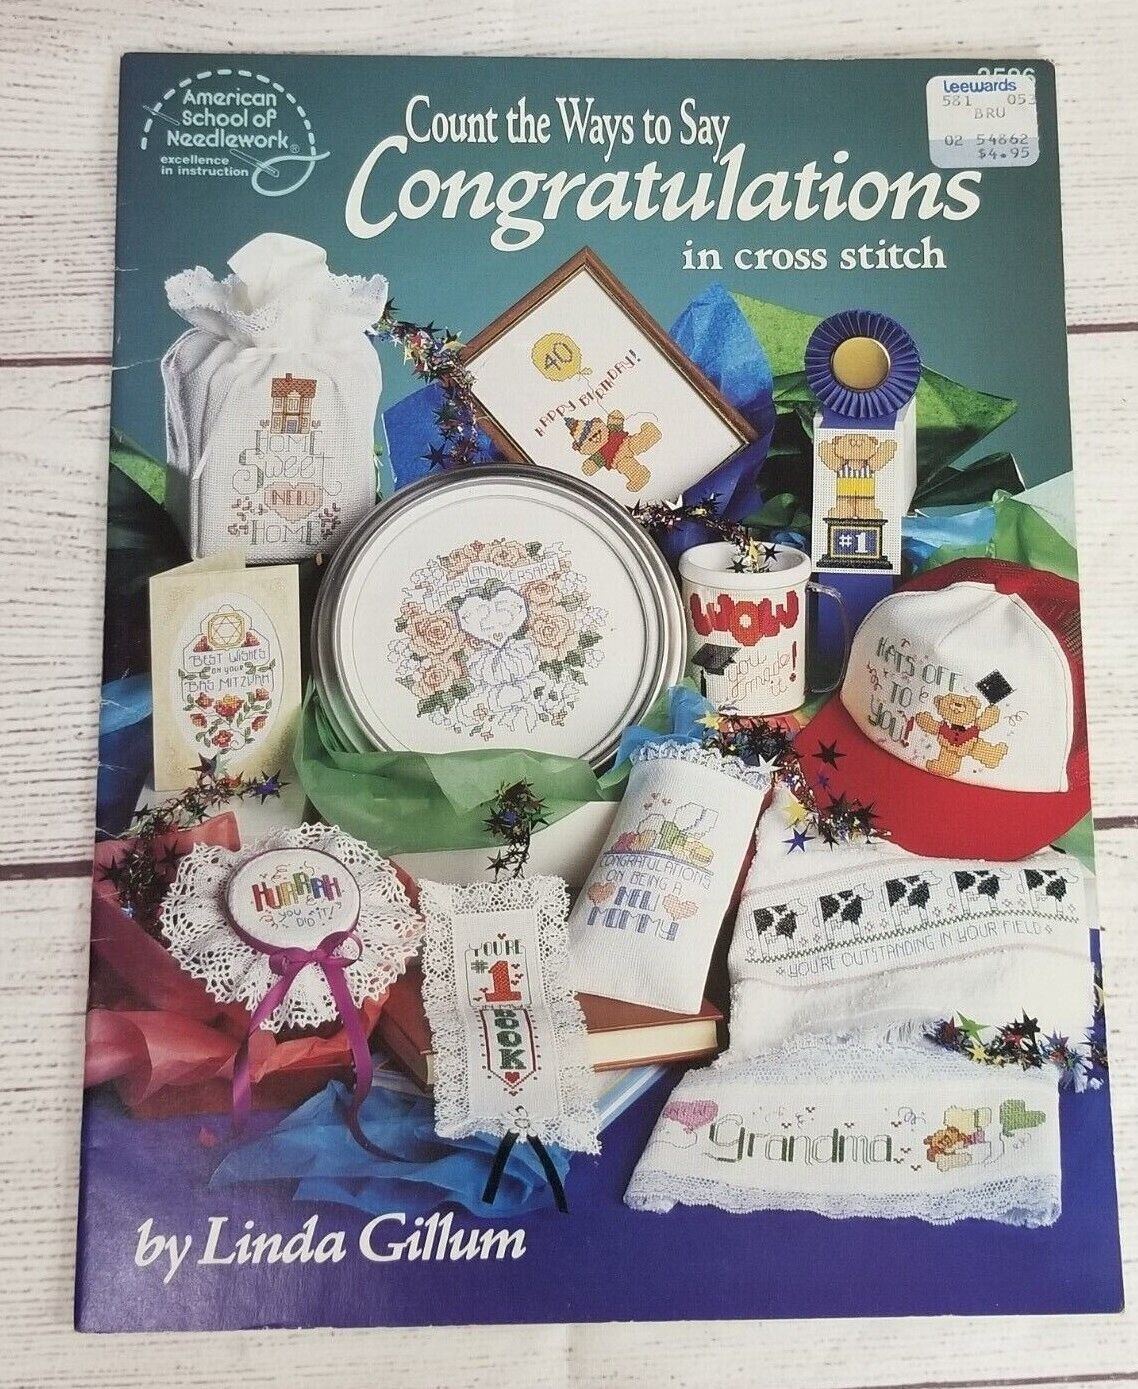 Count the Ways to Say Congratulations in Cross Stitch Leaflet 1992 - $9.85